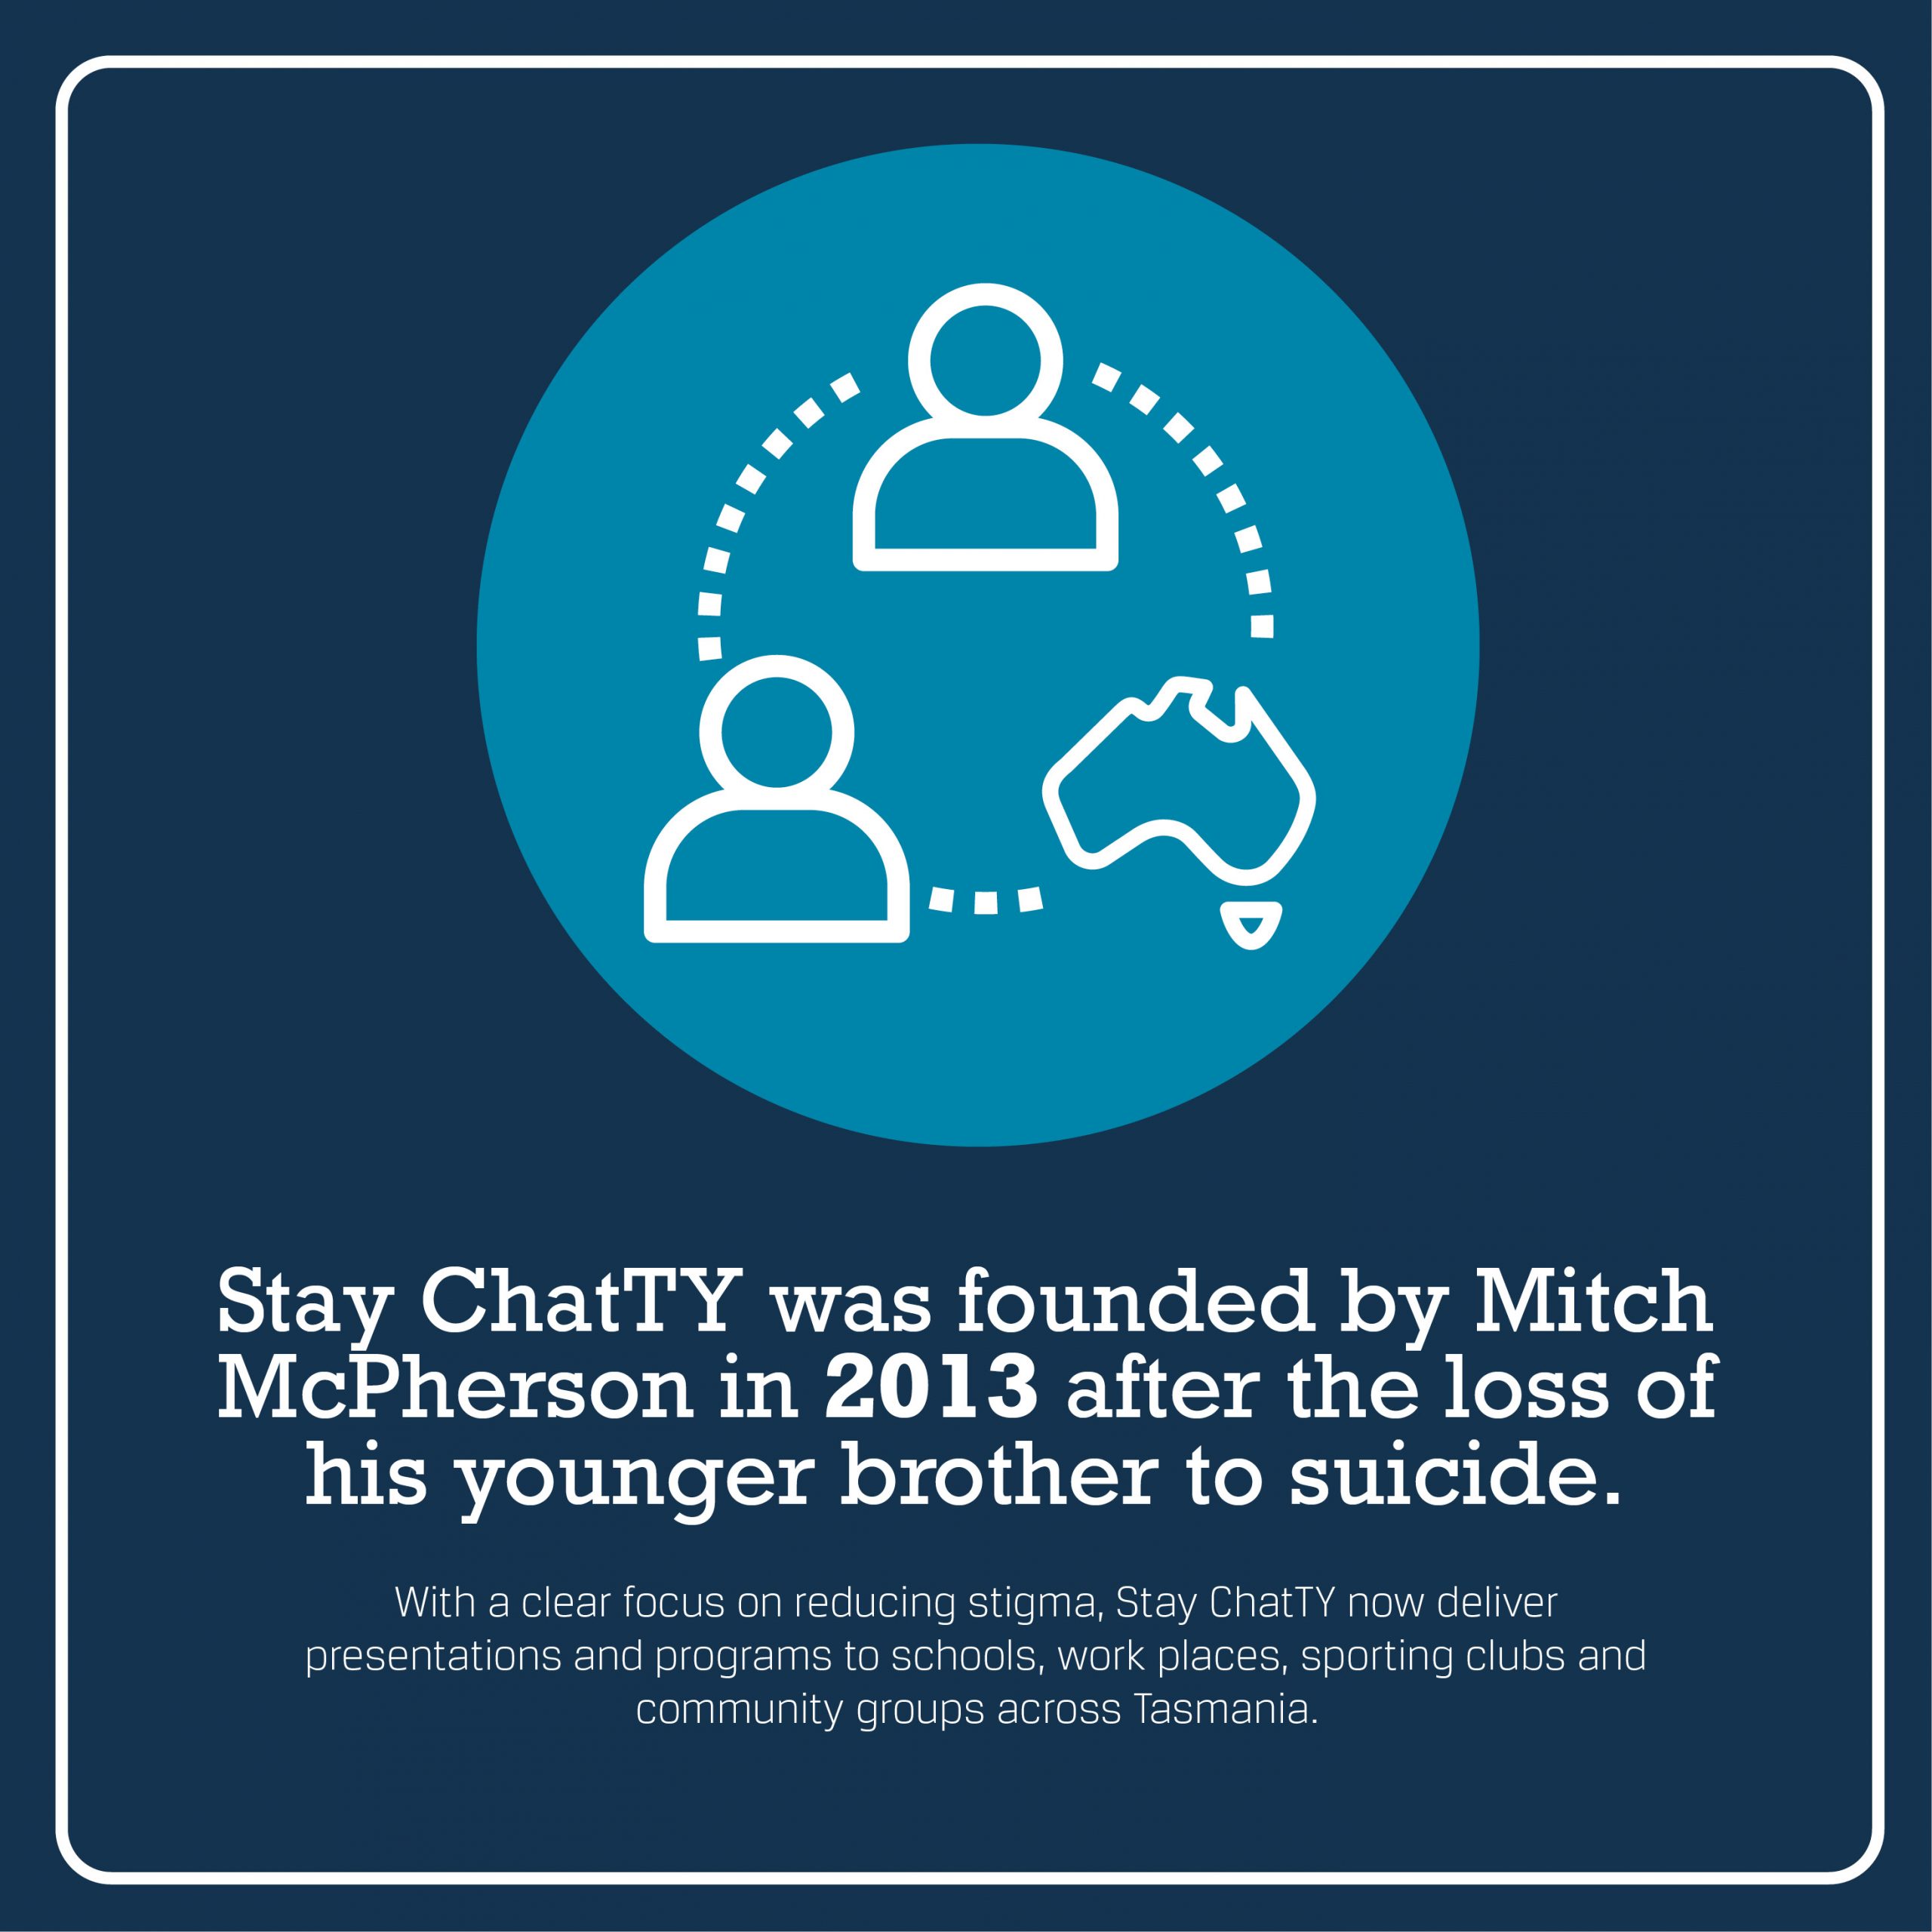 Stay ChatTY - Stay ChatTY was founded by Mitch McPherson in 2013 after the loss of his younger brother to suicide.